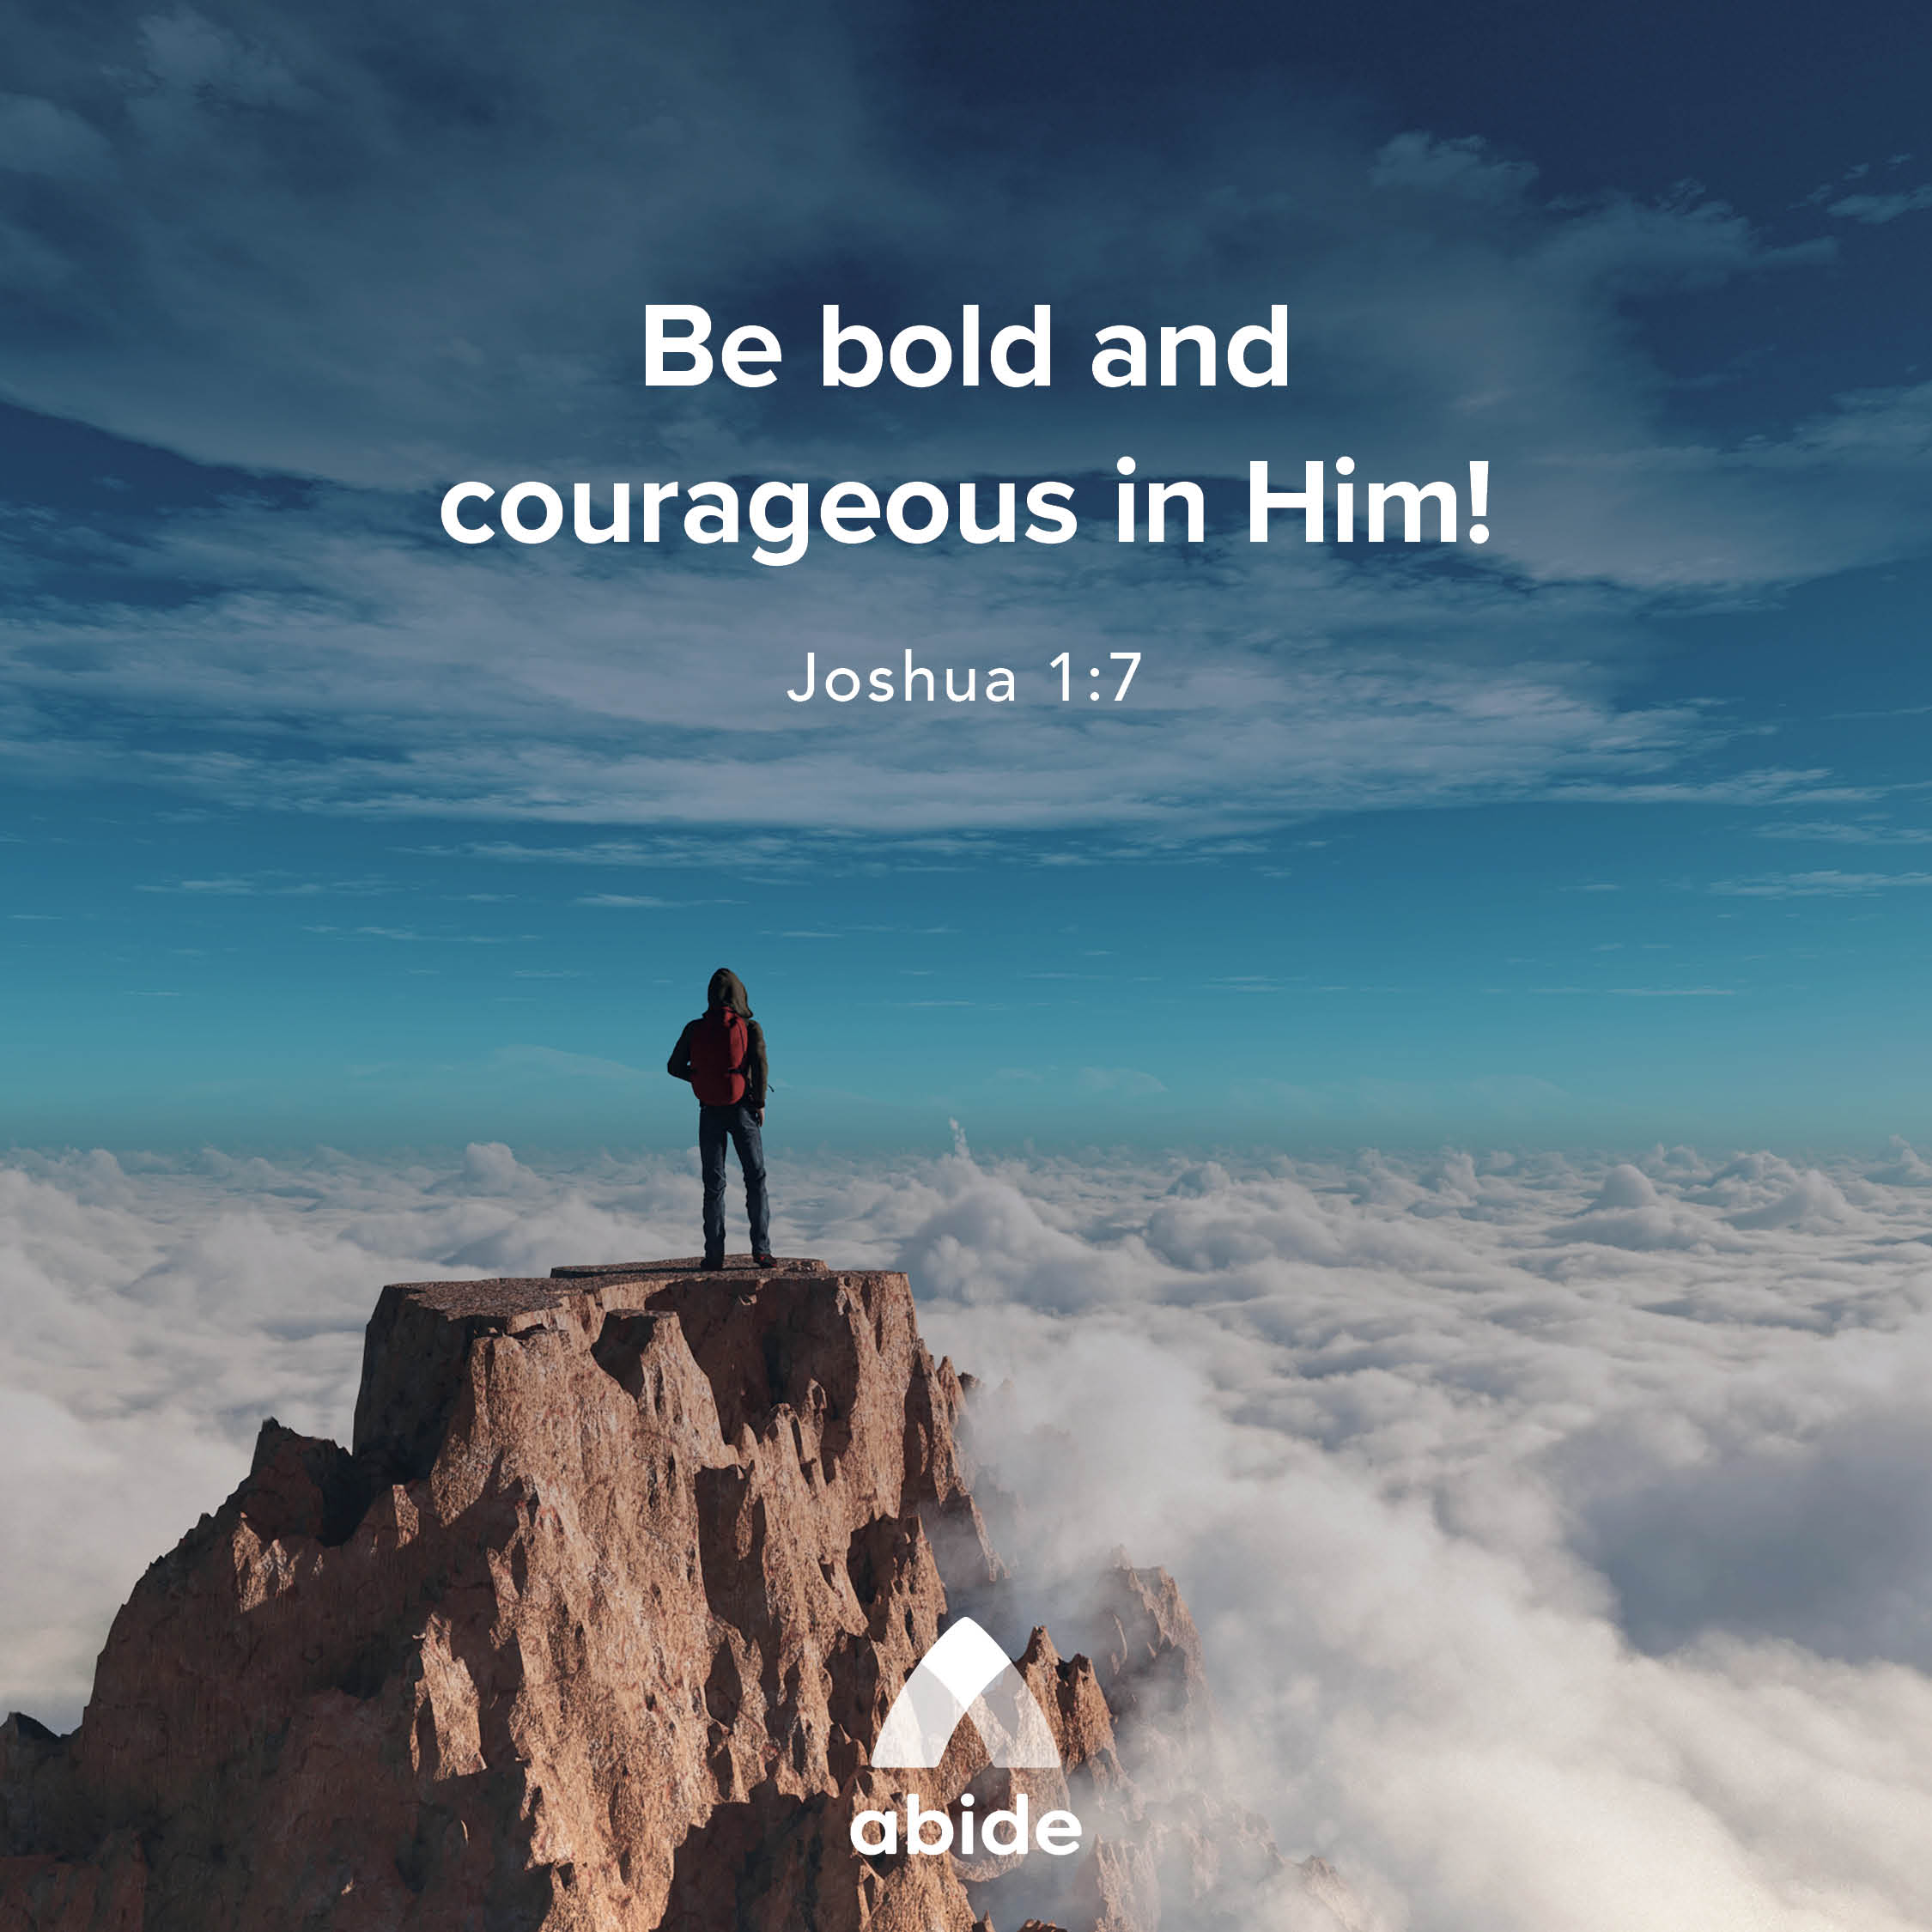 A Call to Living Courageously